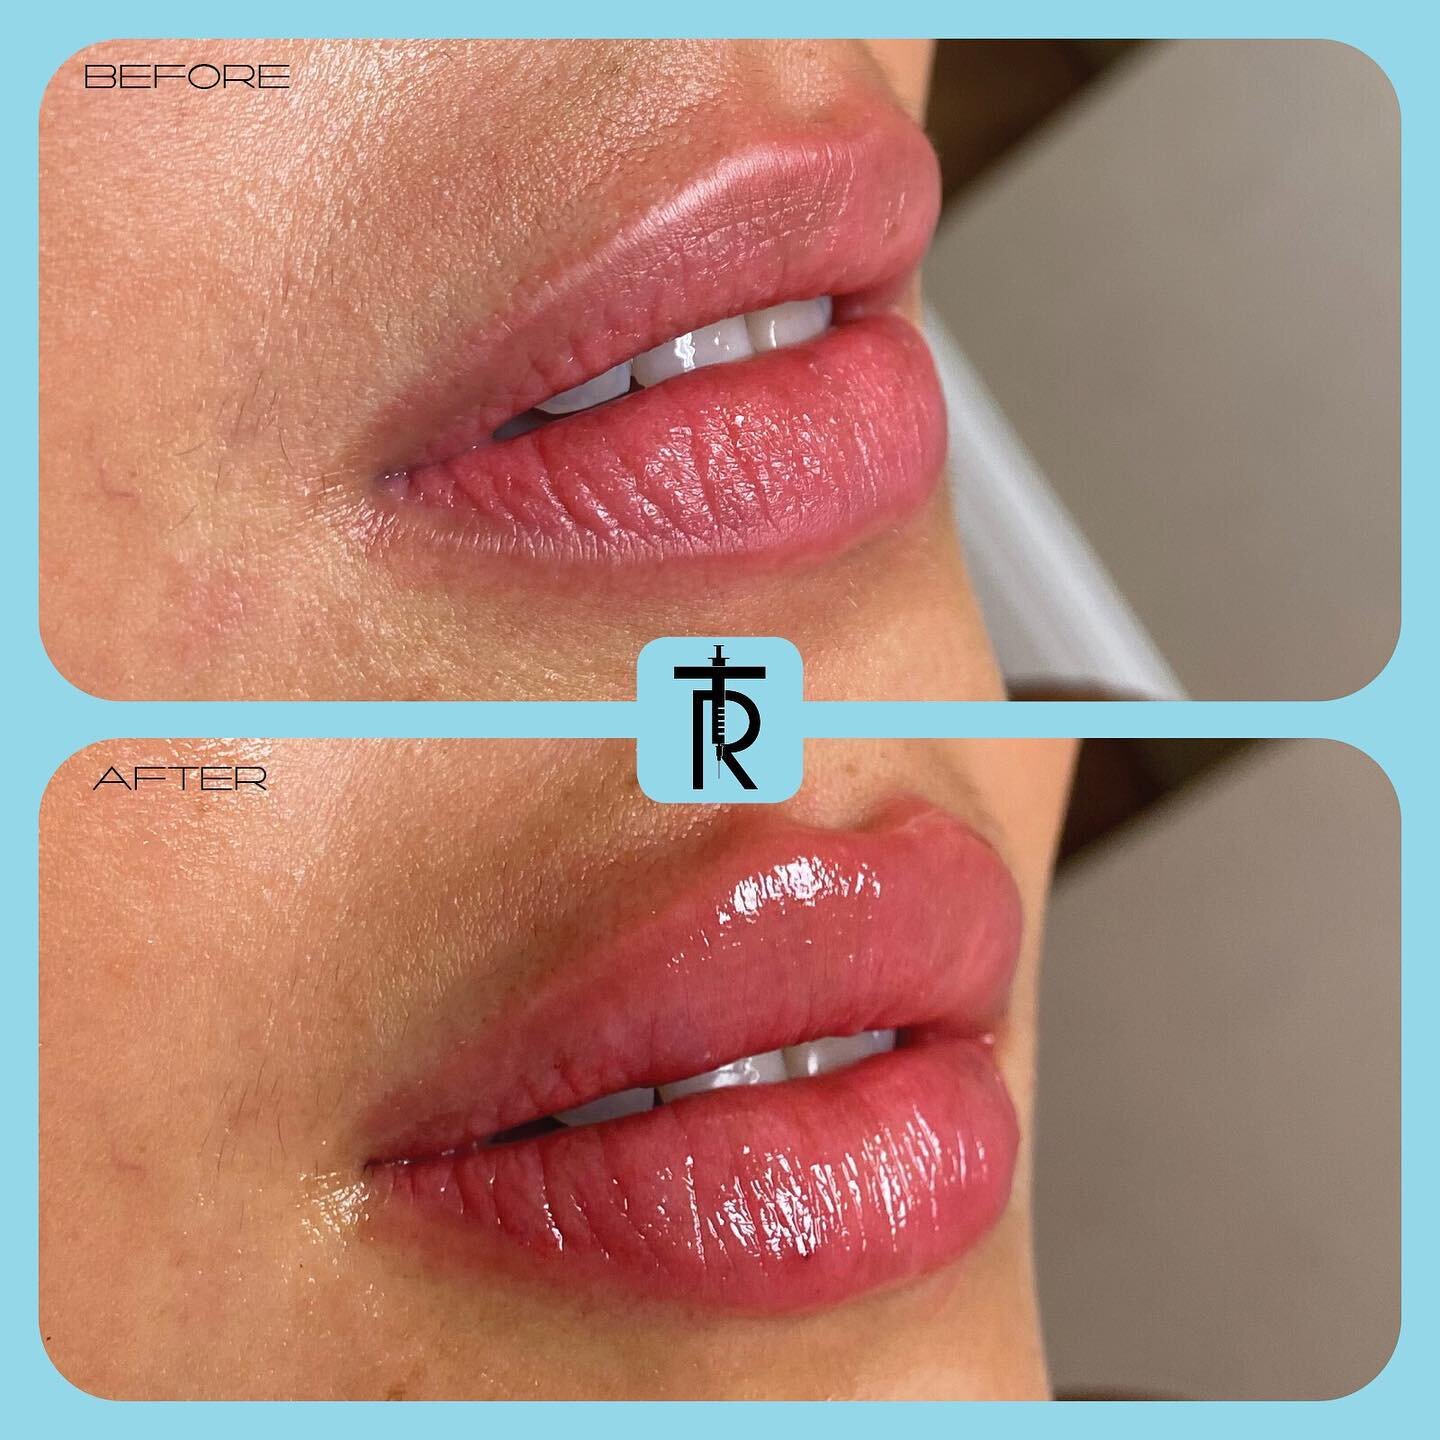 This patient desired full bodied lips with a defined Cupid&rsquo;s bow and border. This was achieved in 1 visit with 1 syringe of hyaluronic acid filler💉👄

📞 Call 212-249-8172 to book an appointment
Or click the link in bio to book online 💉
.
.
.